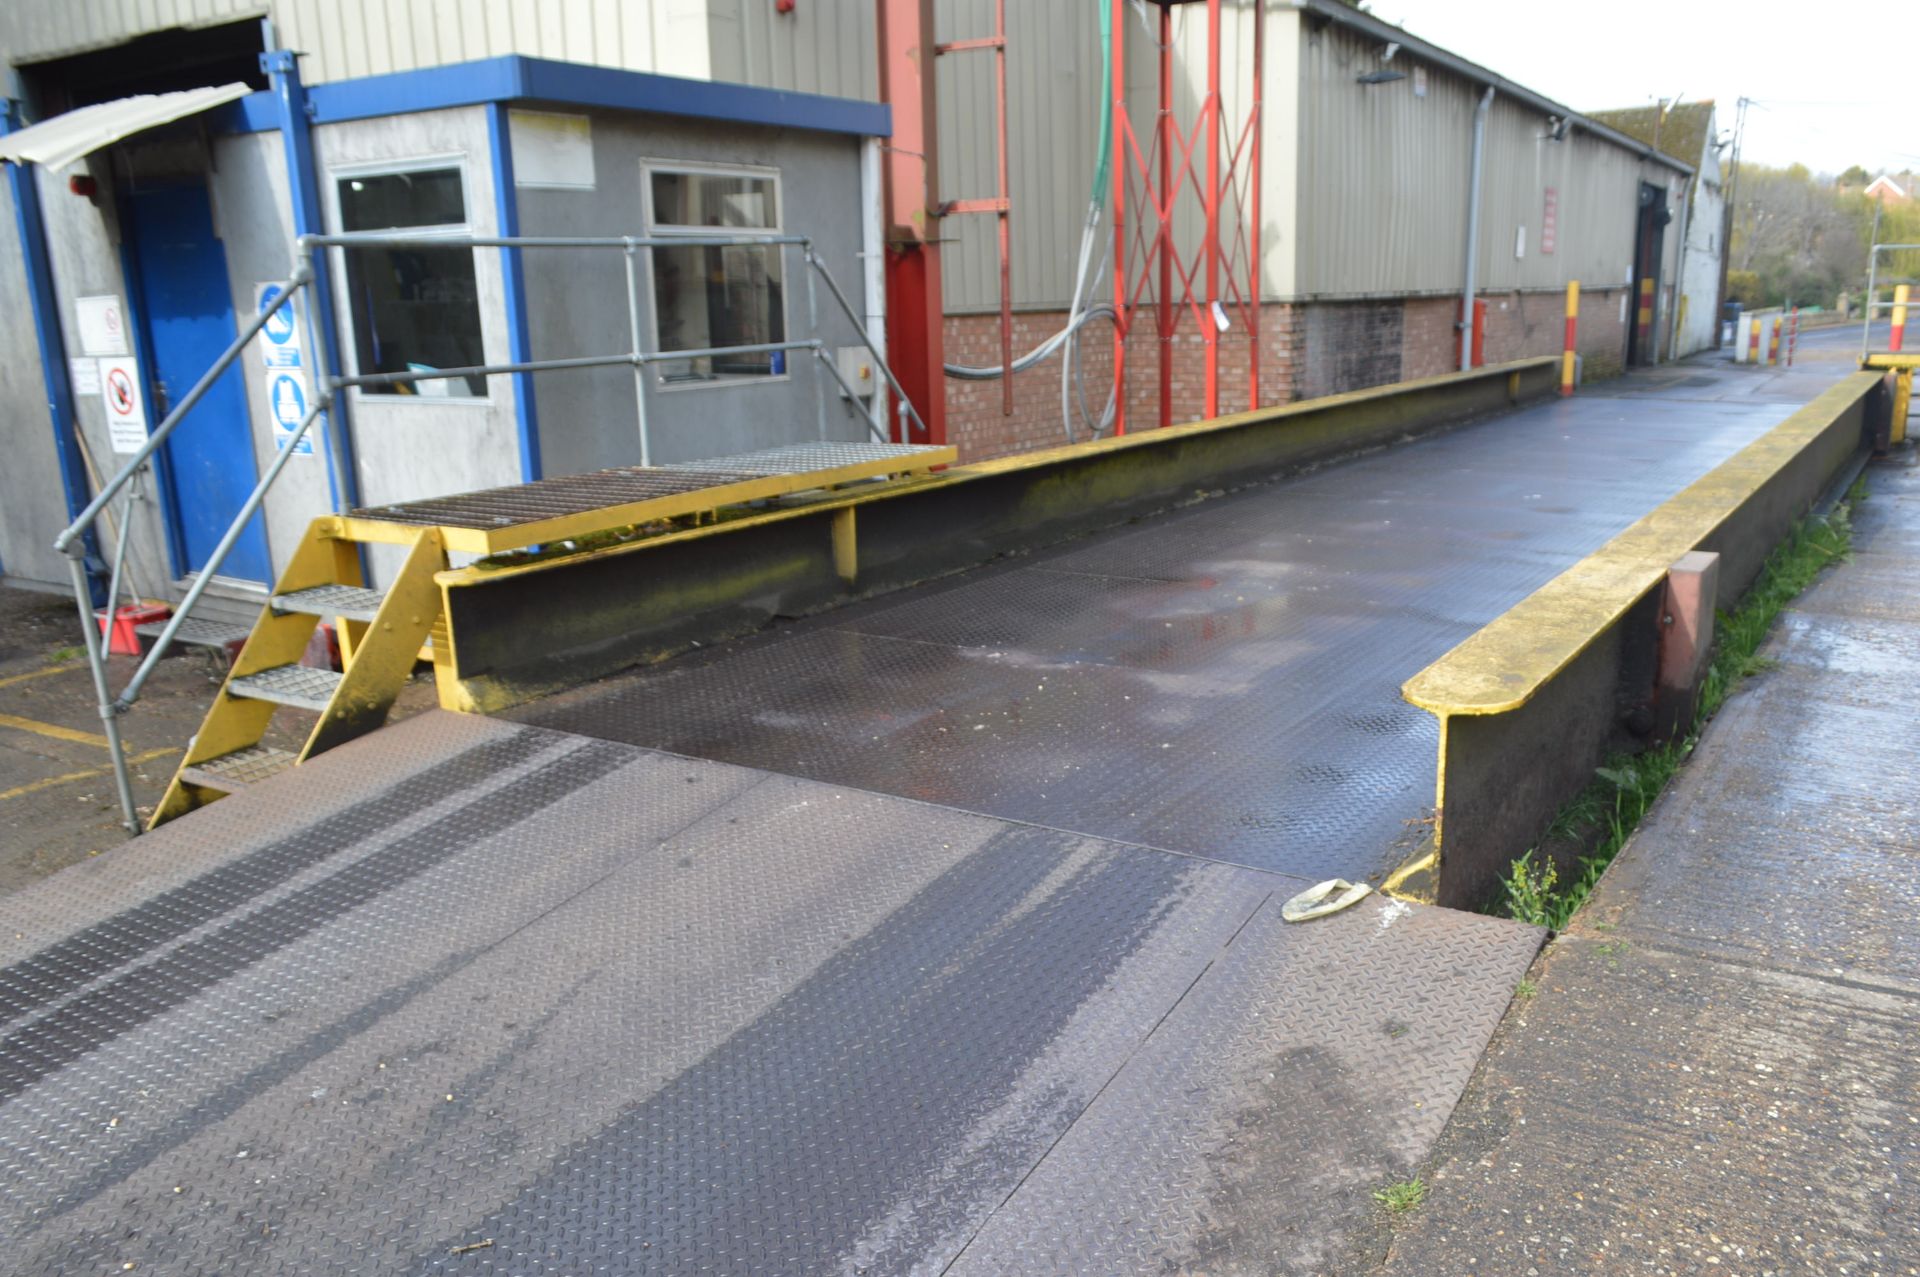 50,000kg cap. OVER SURFACE LOADCELL WEIGHBRIDGE, approx. 15m x 2.95m, with four loadcells, chequer - Bild 3 aus 8